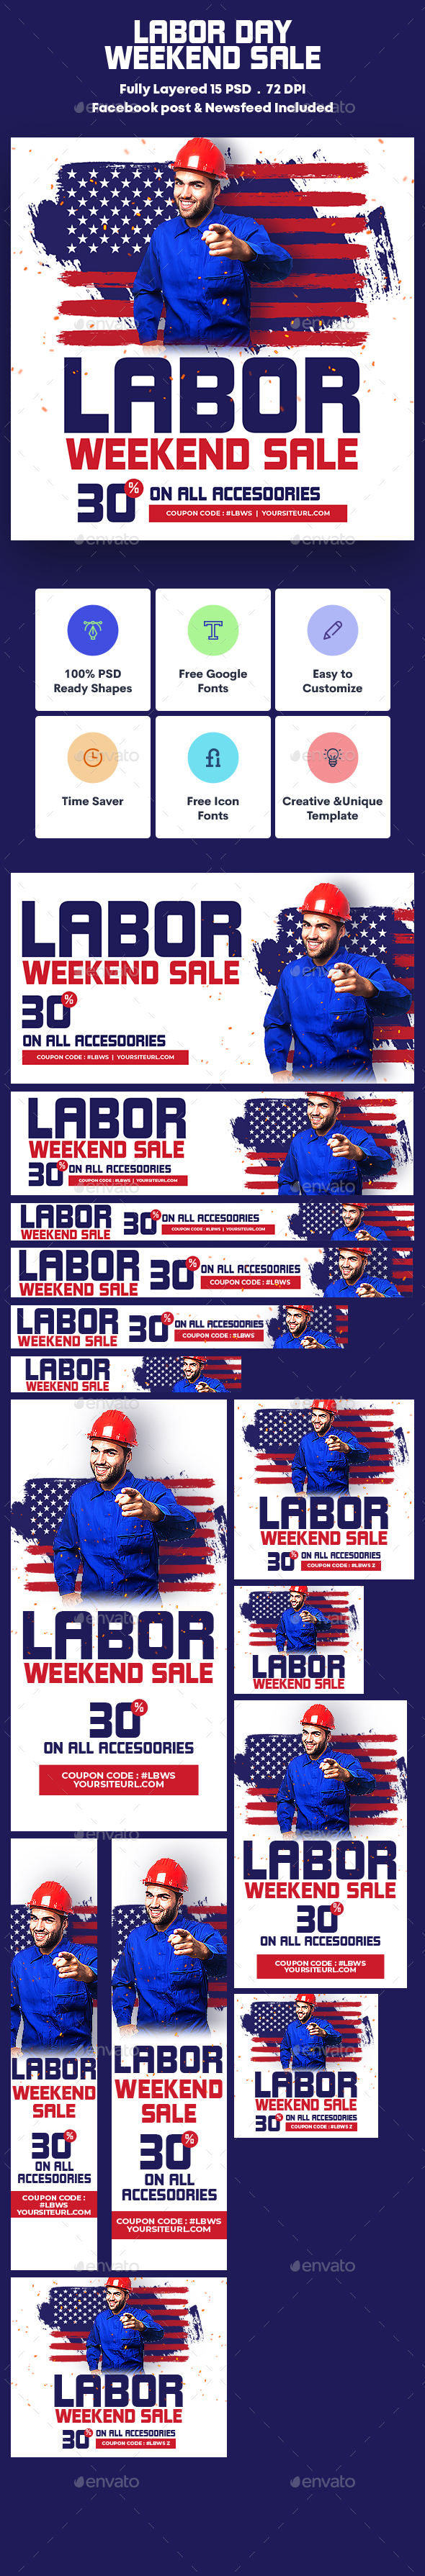 Labor Day Weekend Sale Banners Ad